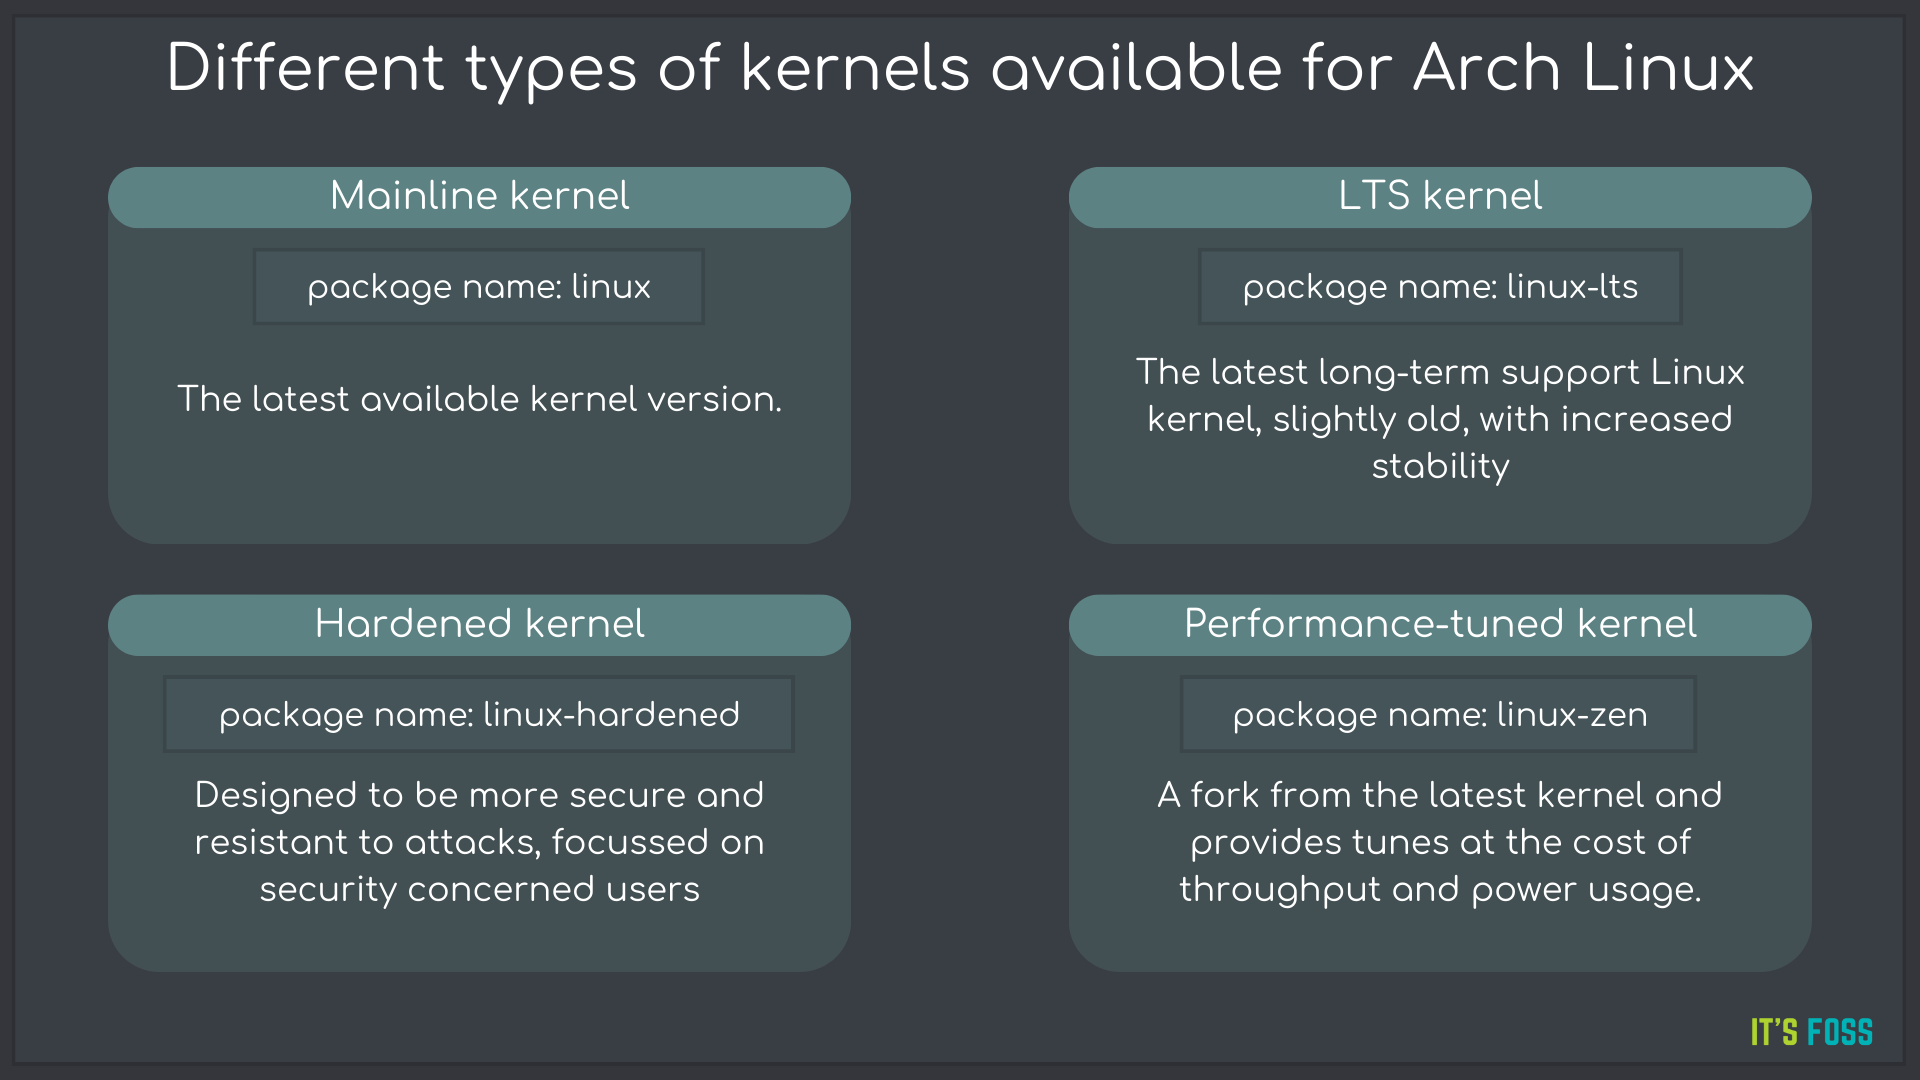 Different types of kernels available in Arch Linux